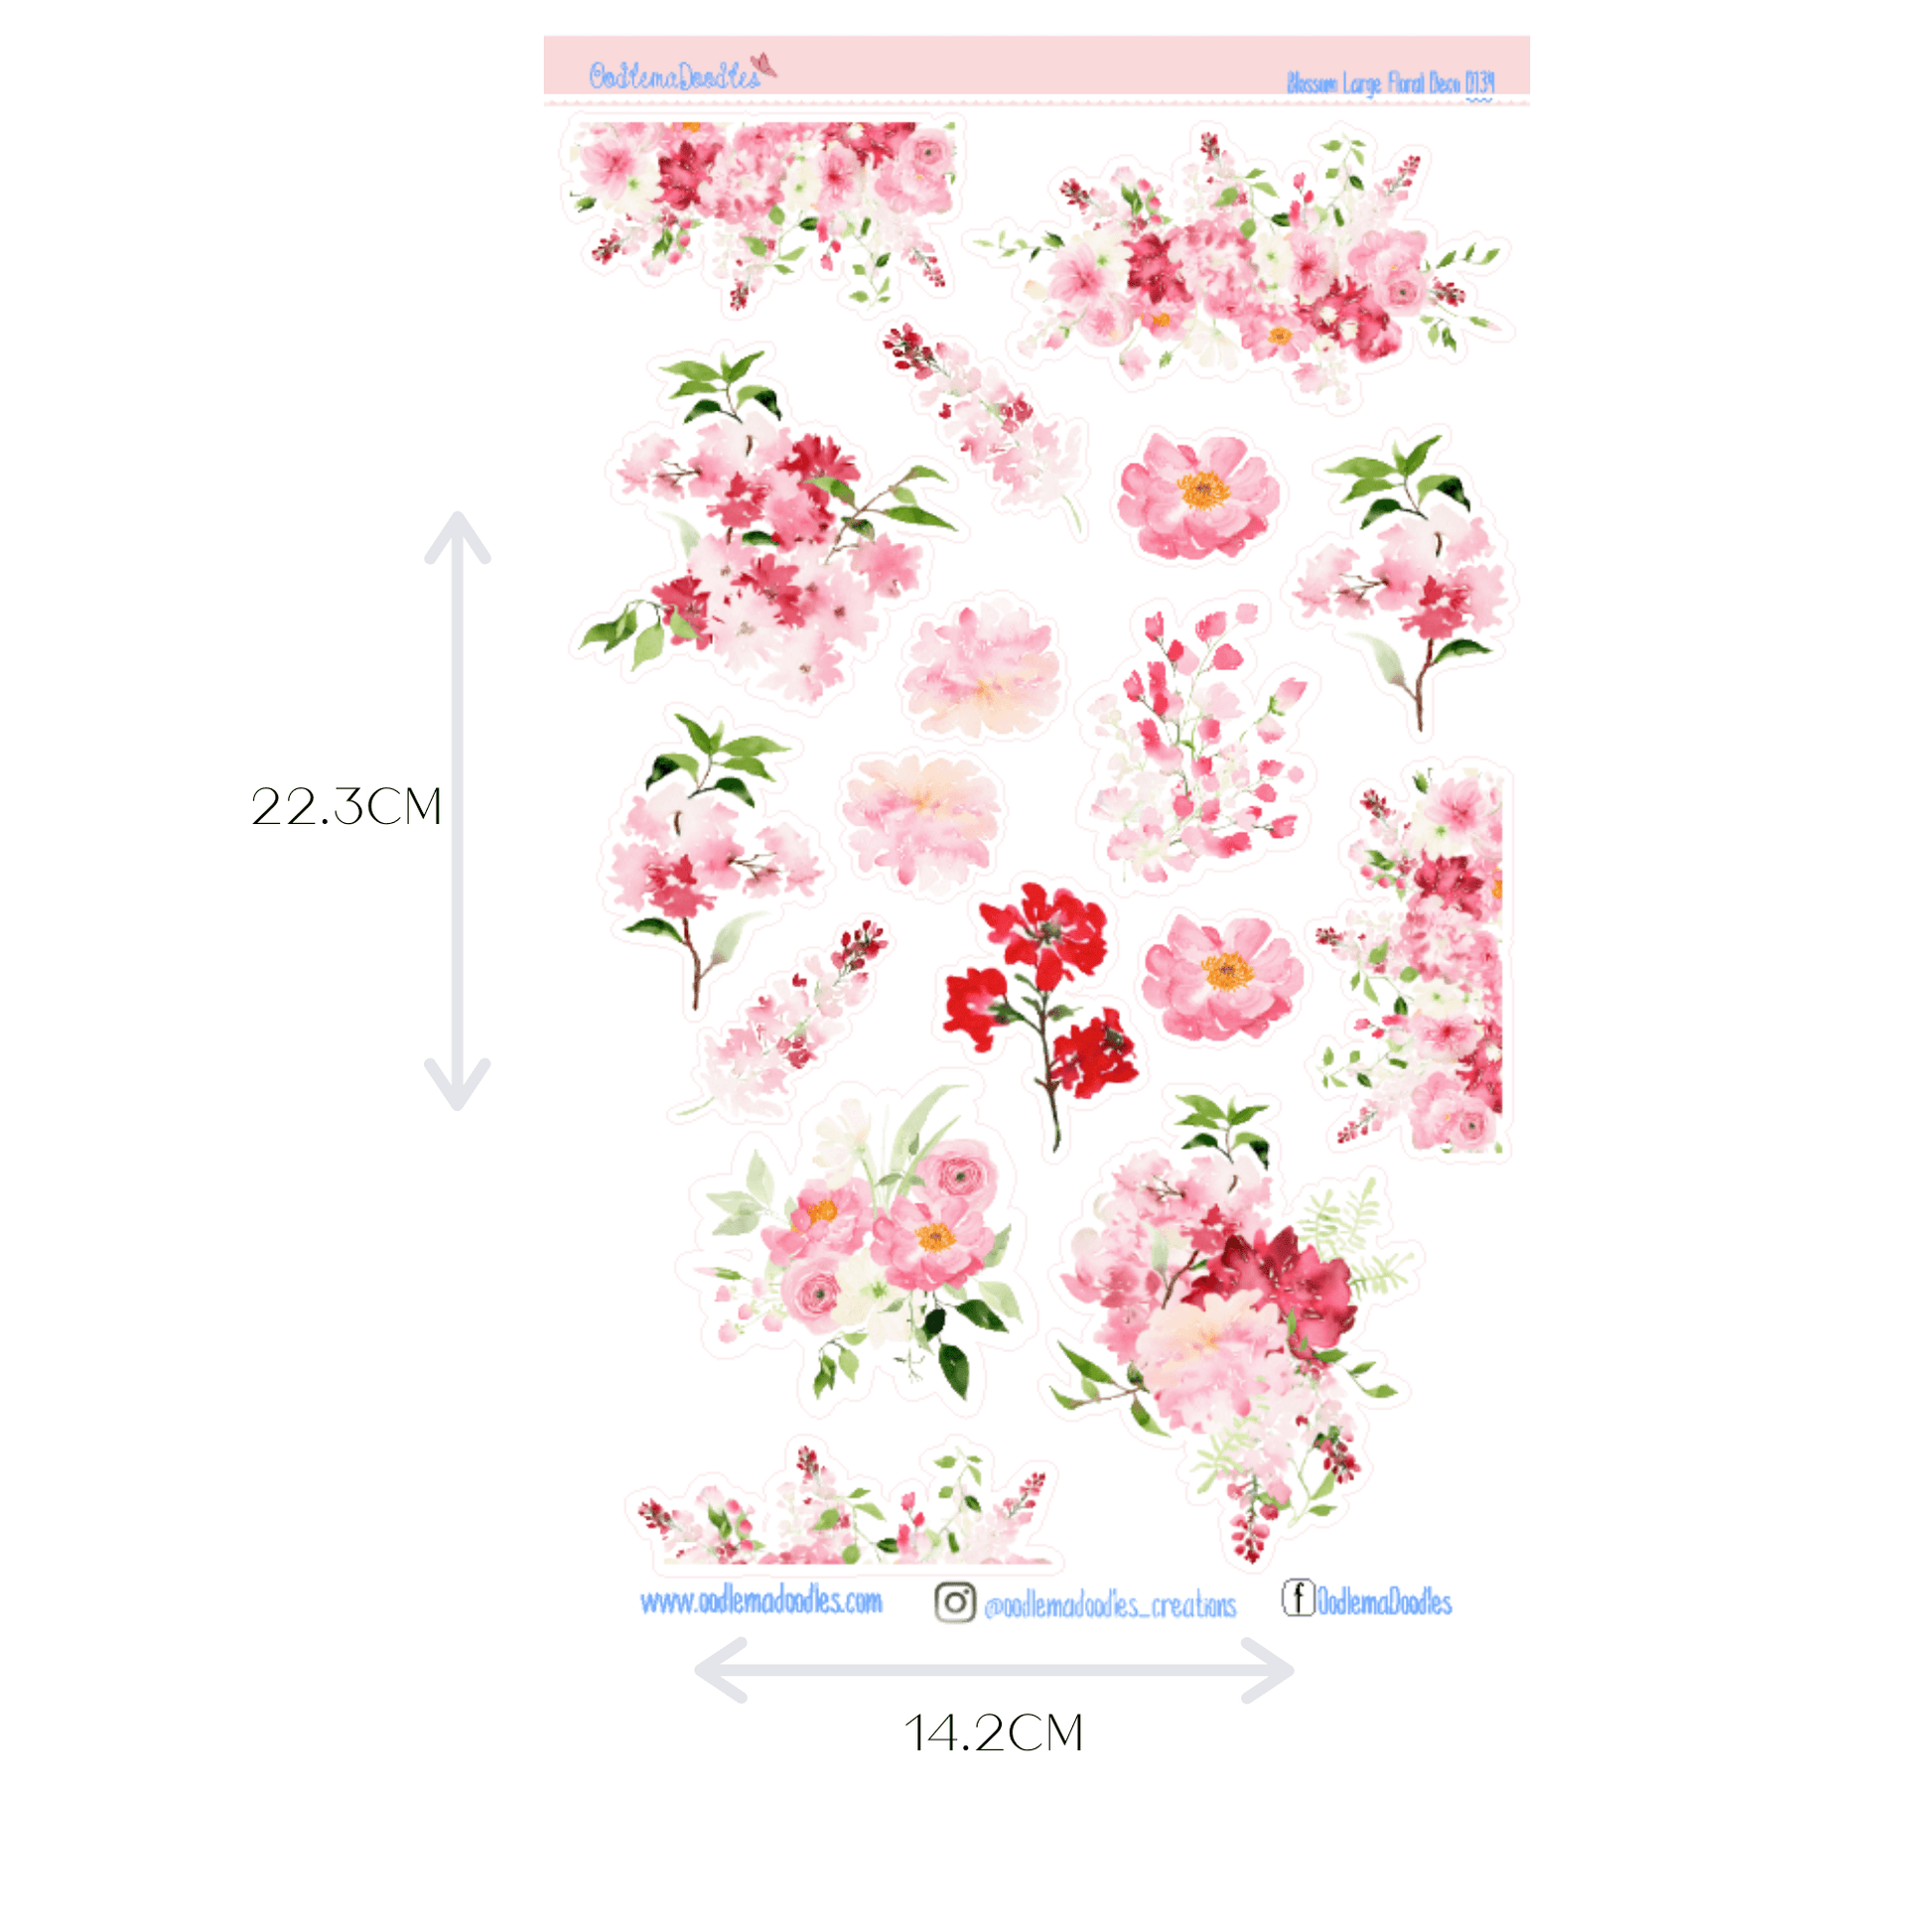 Blossoms Flower Large Decorative Planner Stickers - oodlemadoodles